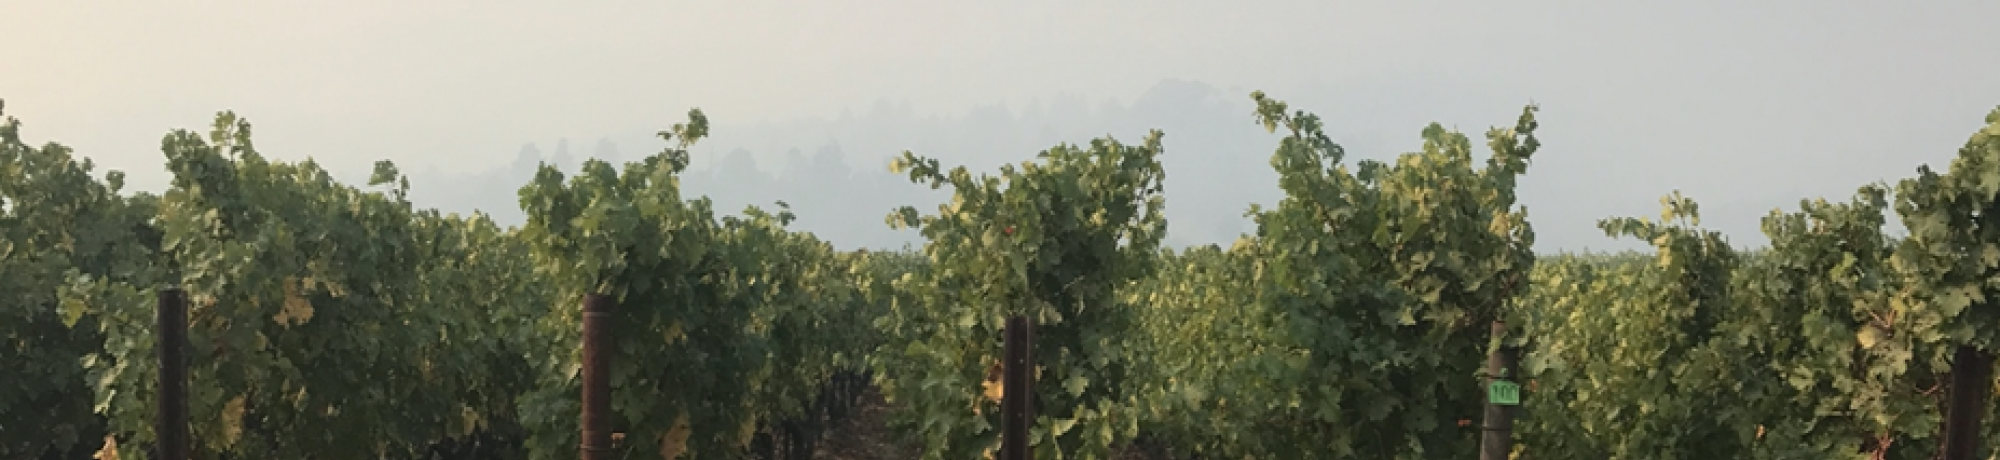 Wildfire grapes